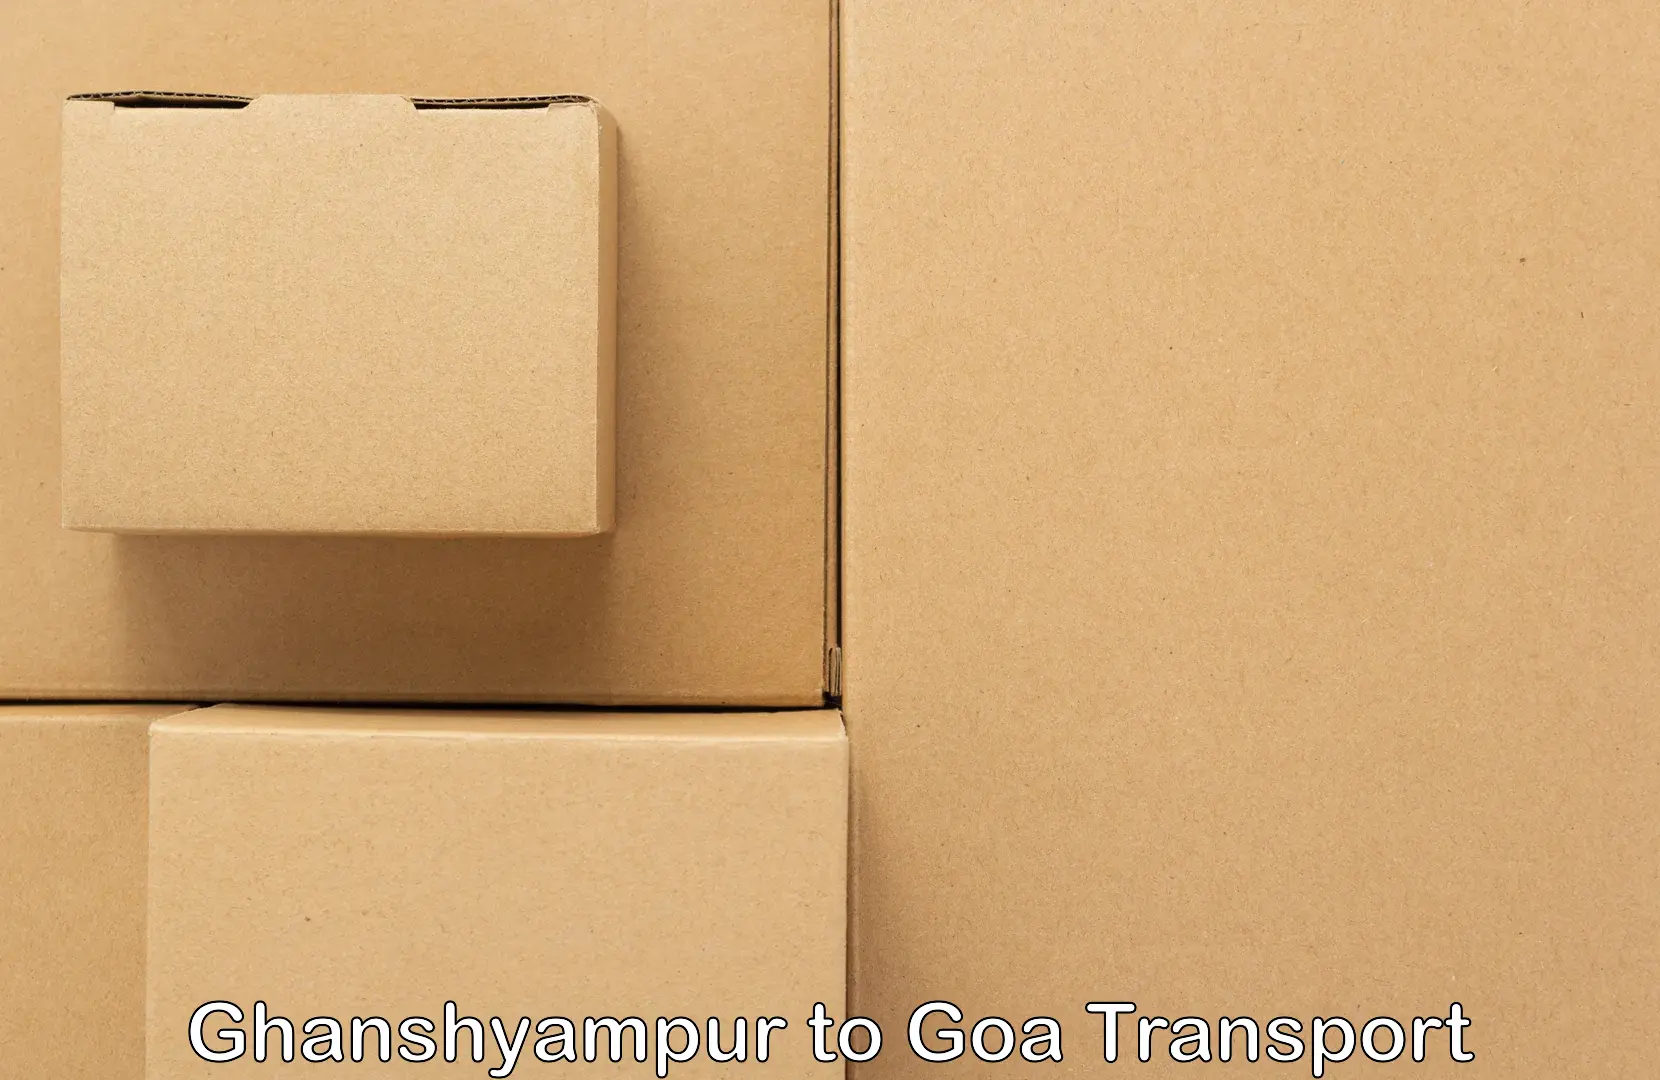 Truck transport companies in India Ghanshyampur to Goa